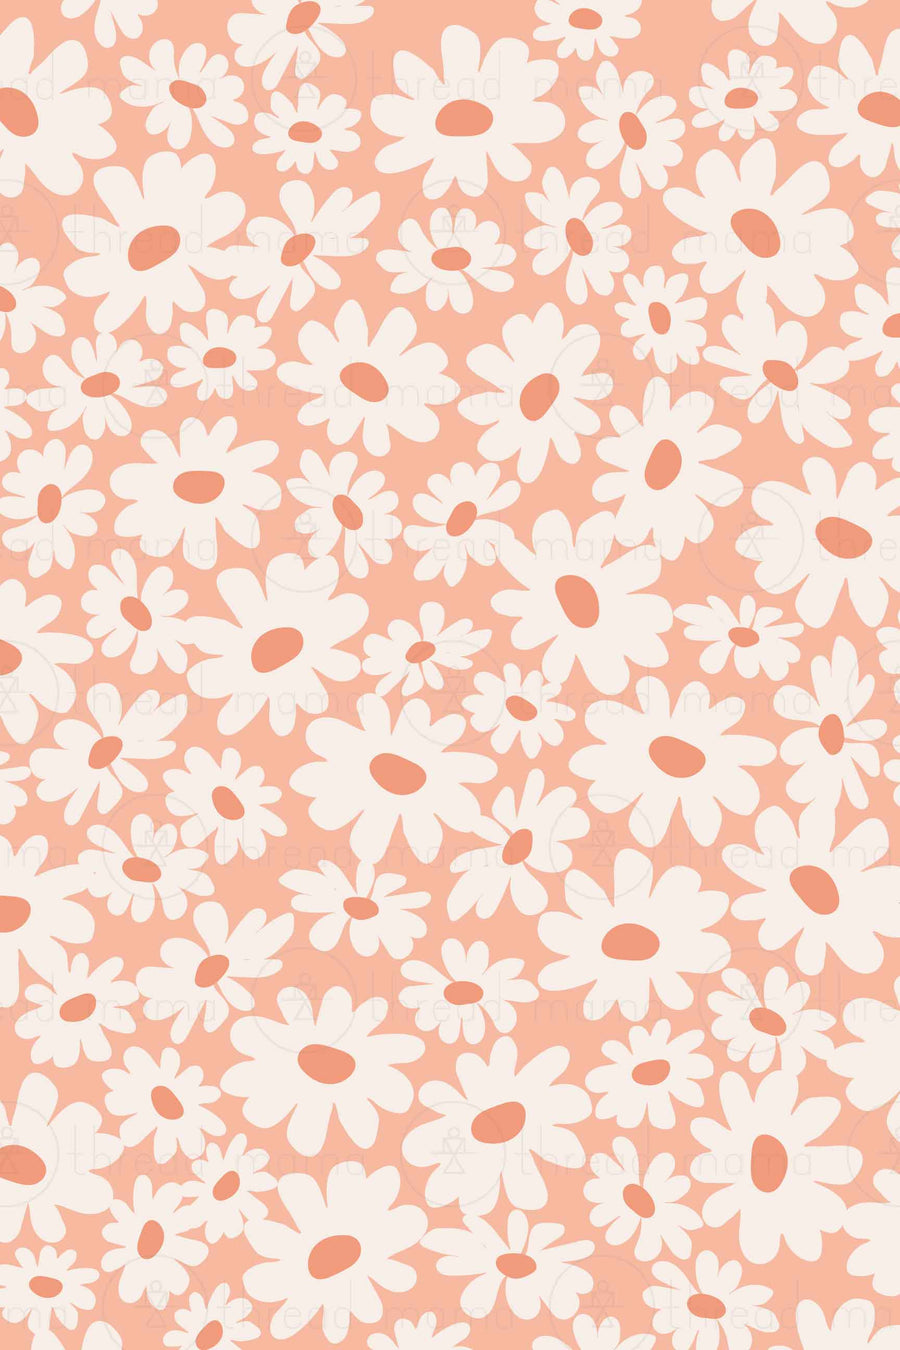 Background Pattern #51 collection (Printable Poster)